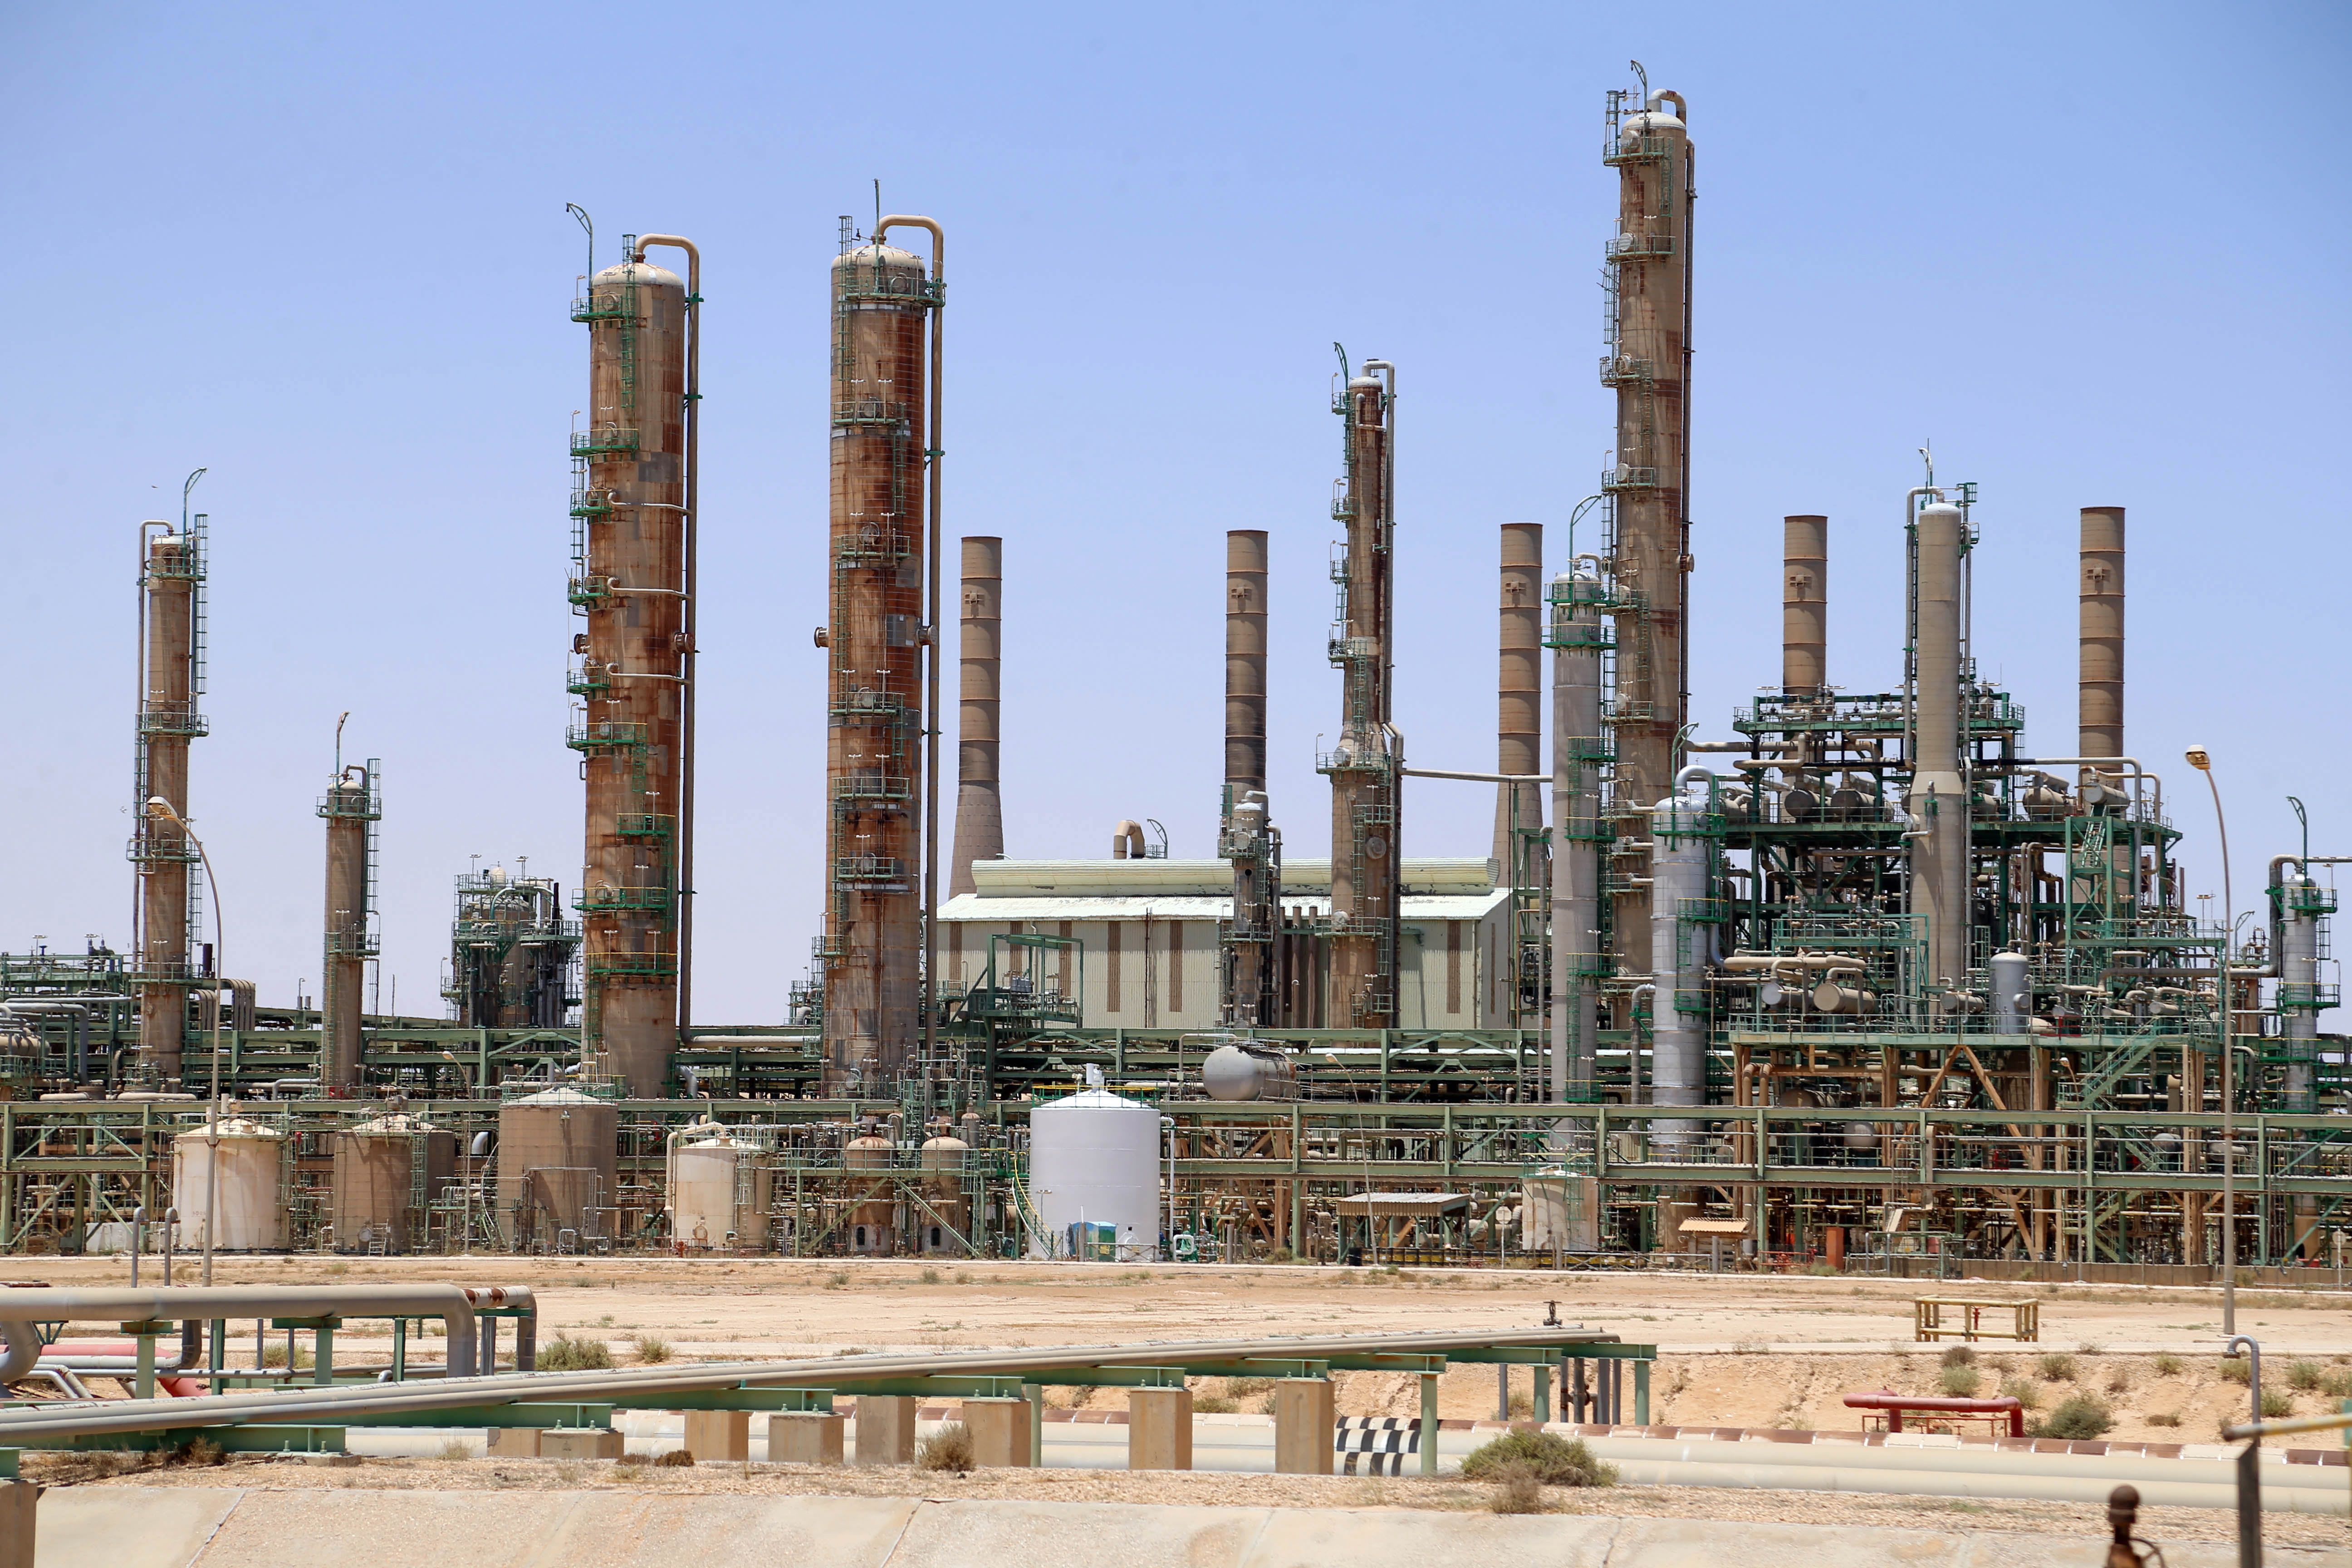 Libyas ramped-up oil output throws another wrench at oil prices and OPECs plans